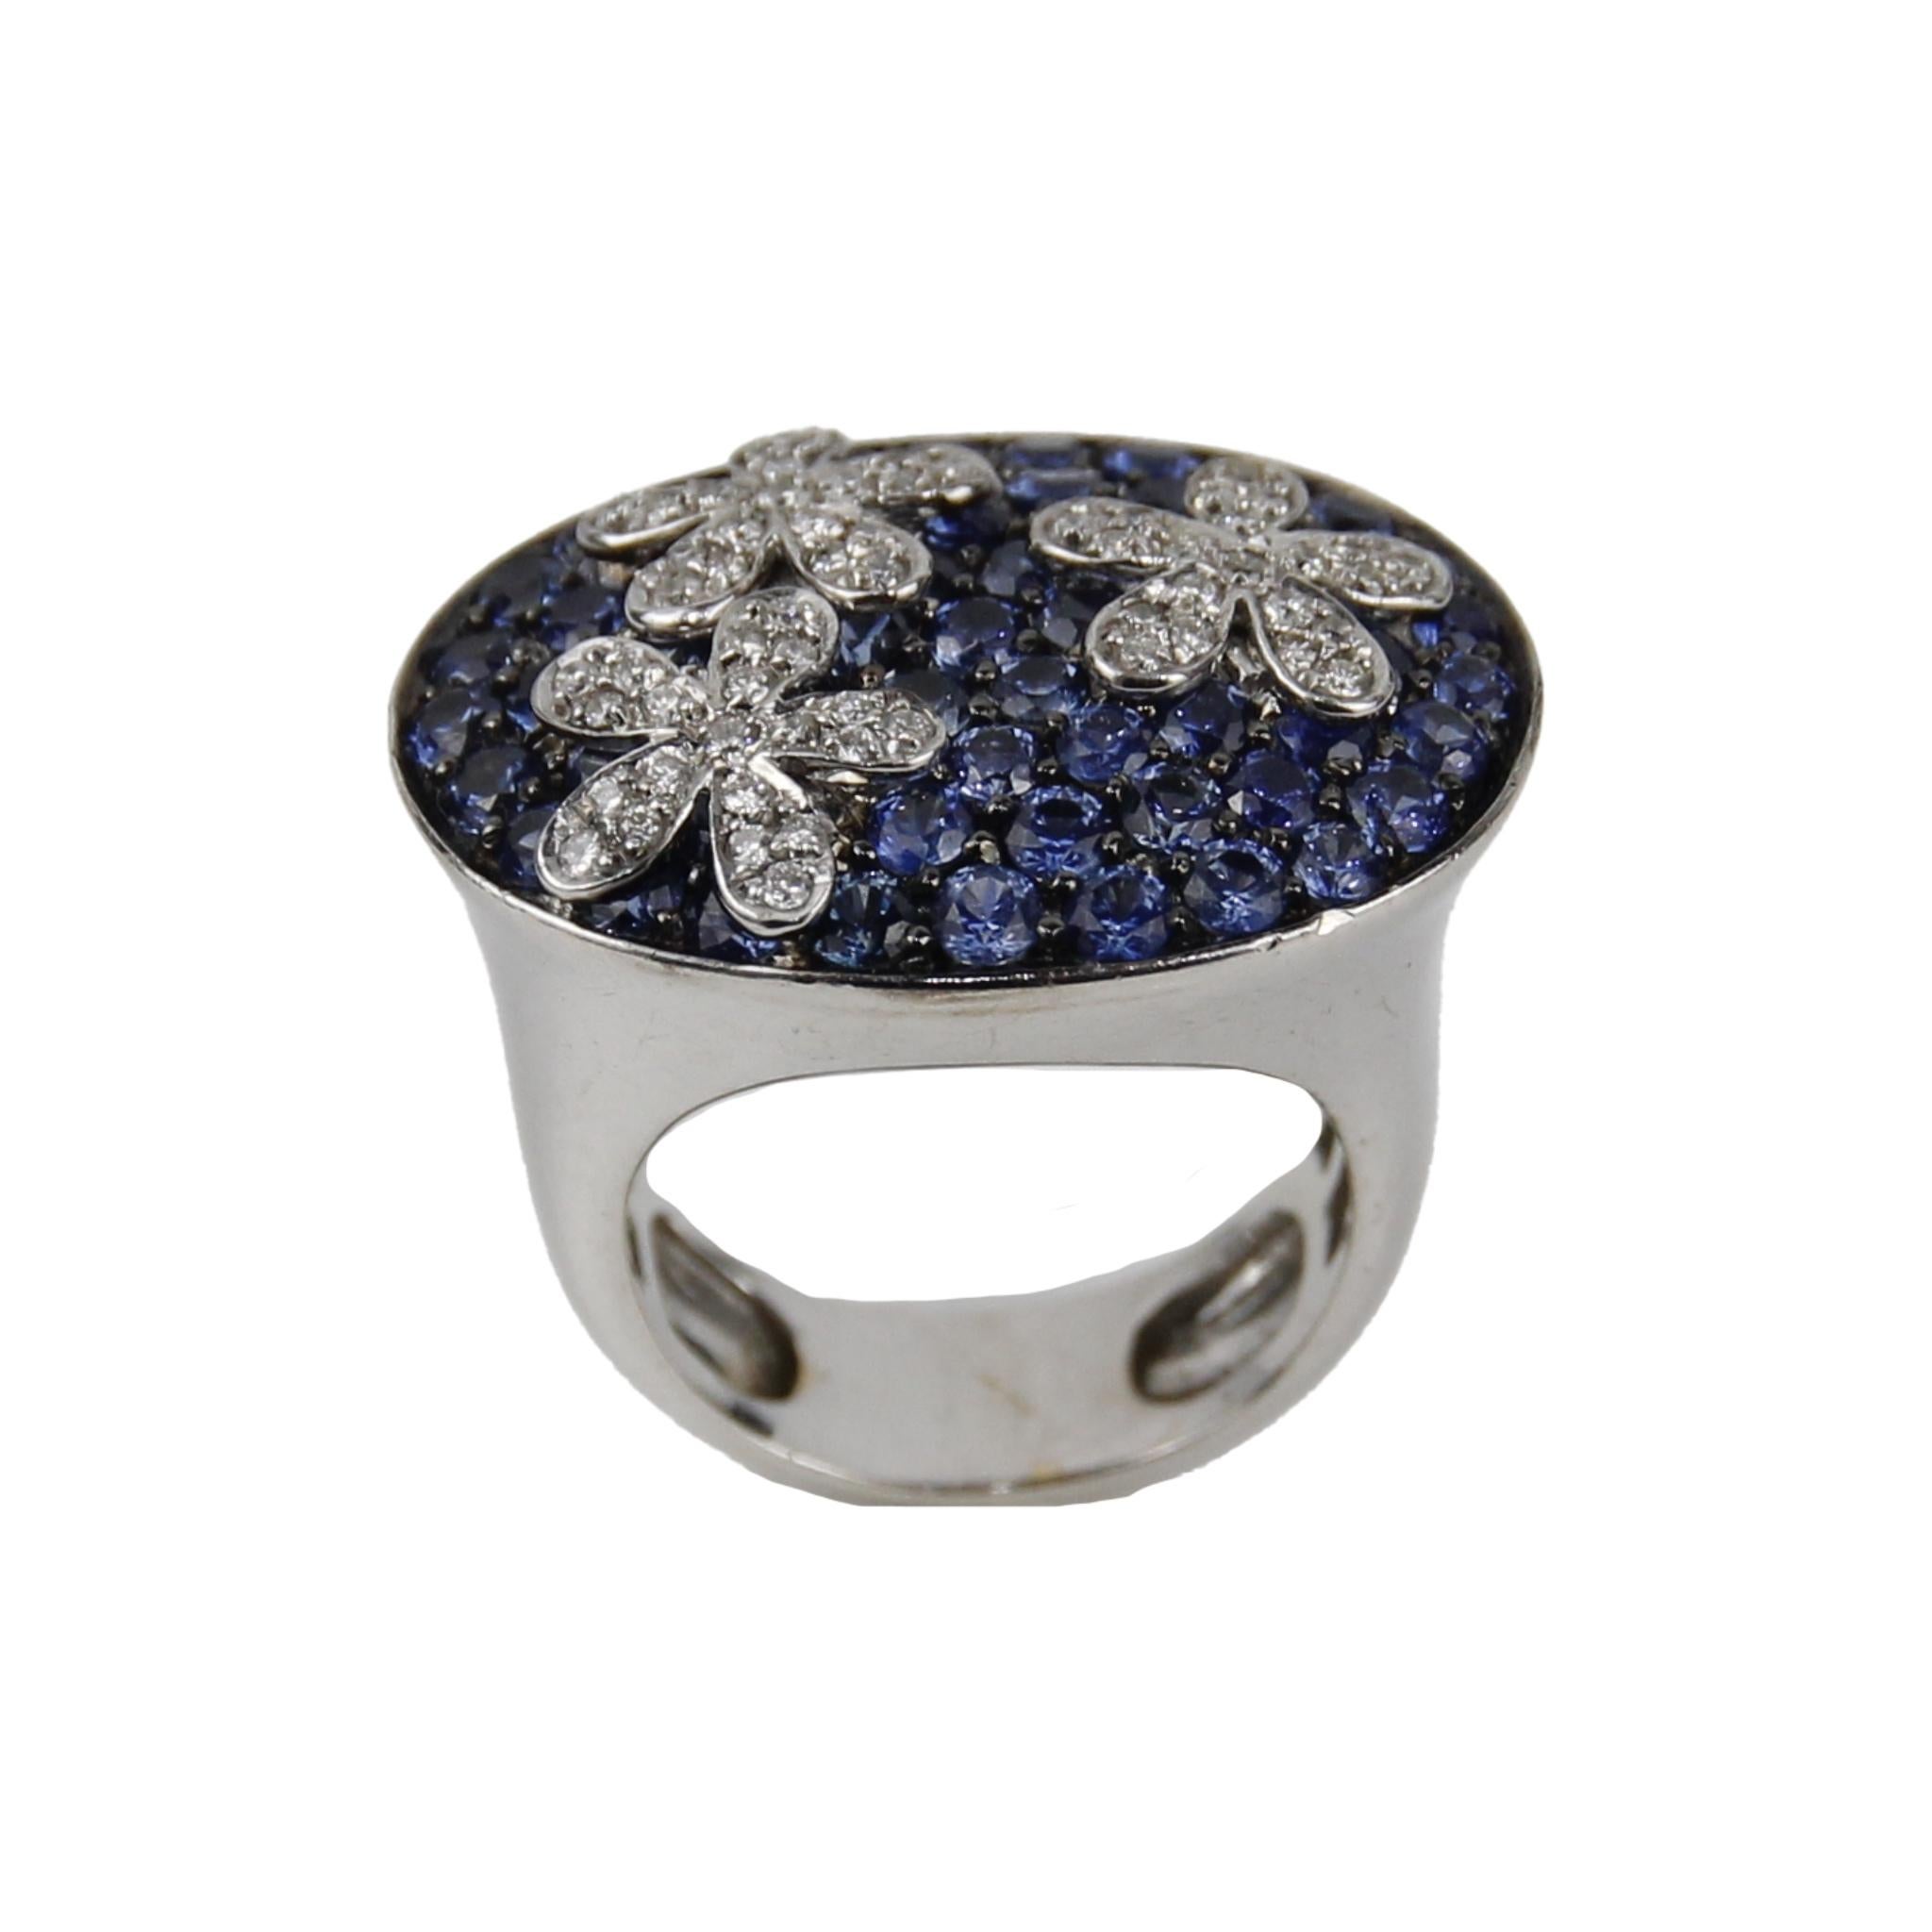 East Coast Jewelry Collection
Diamond and Sapphire Ring
Ring Size: 6.5
Reference number: ECJ01382